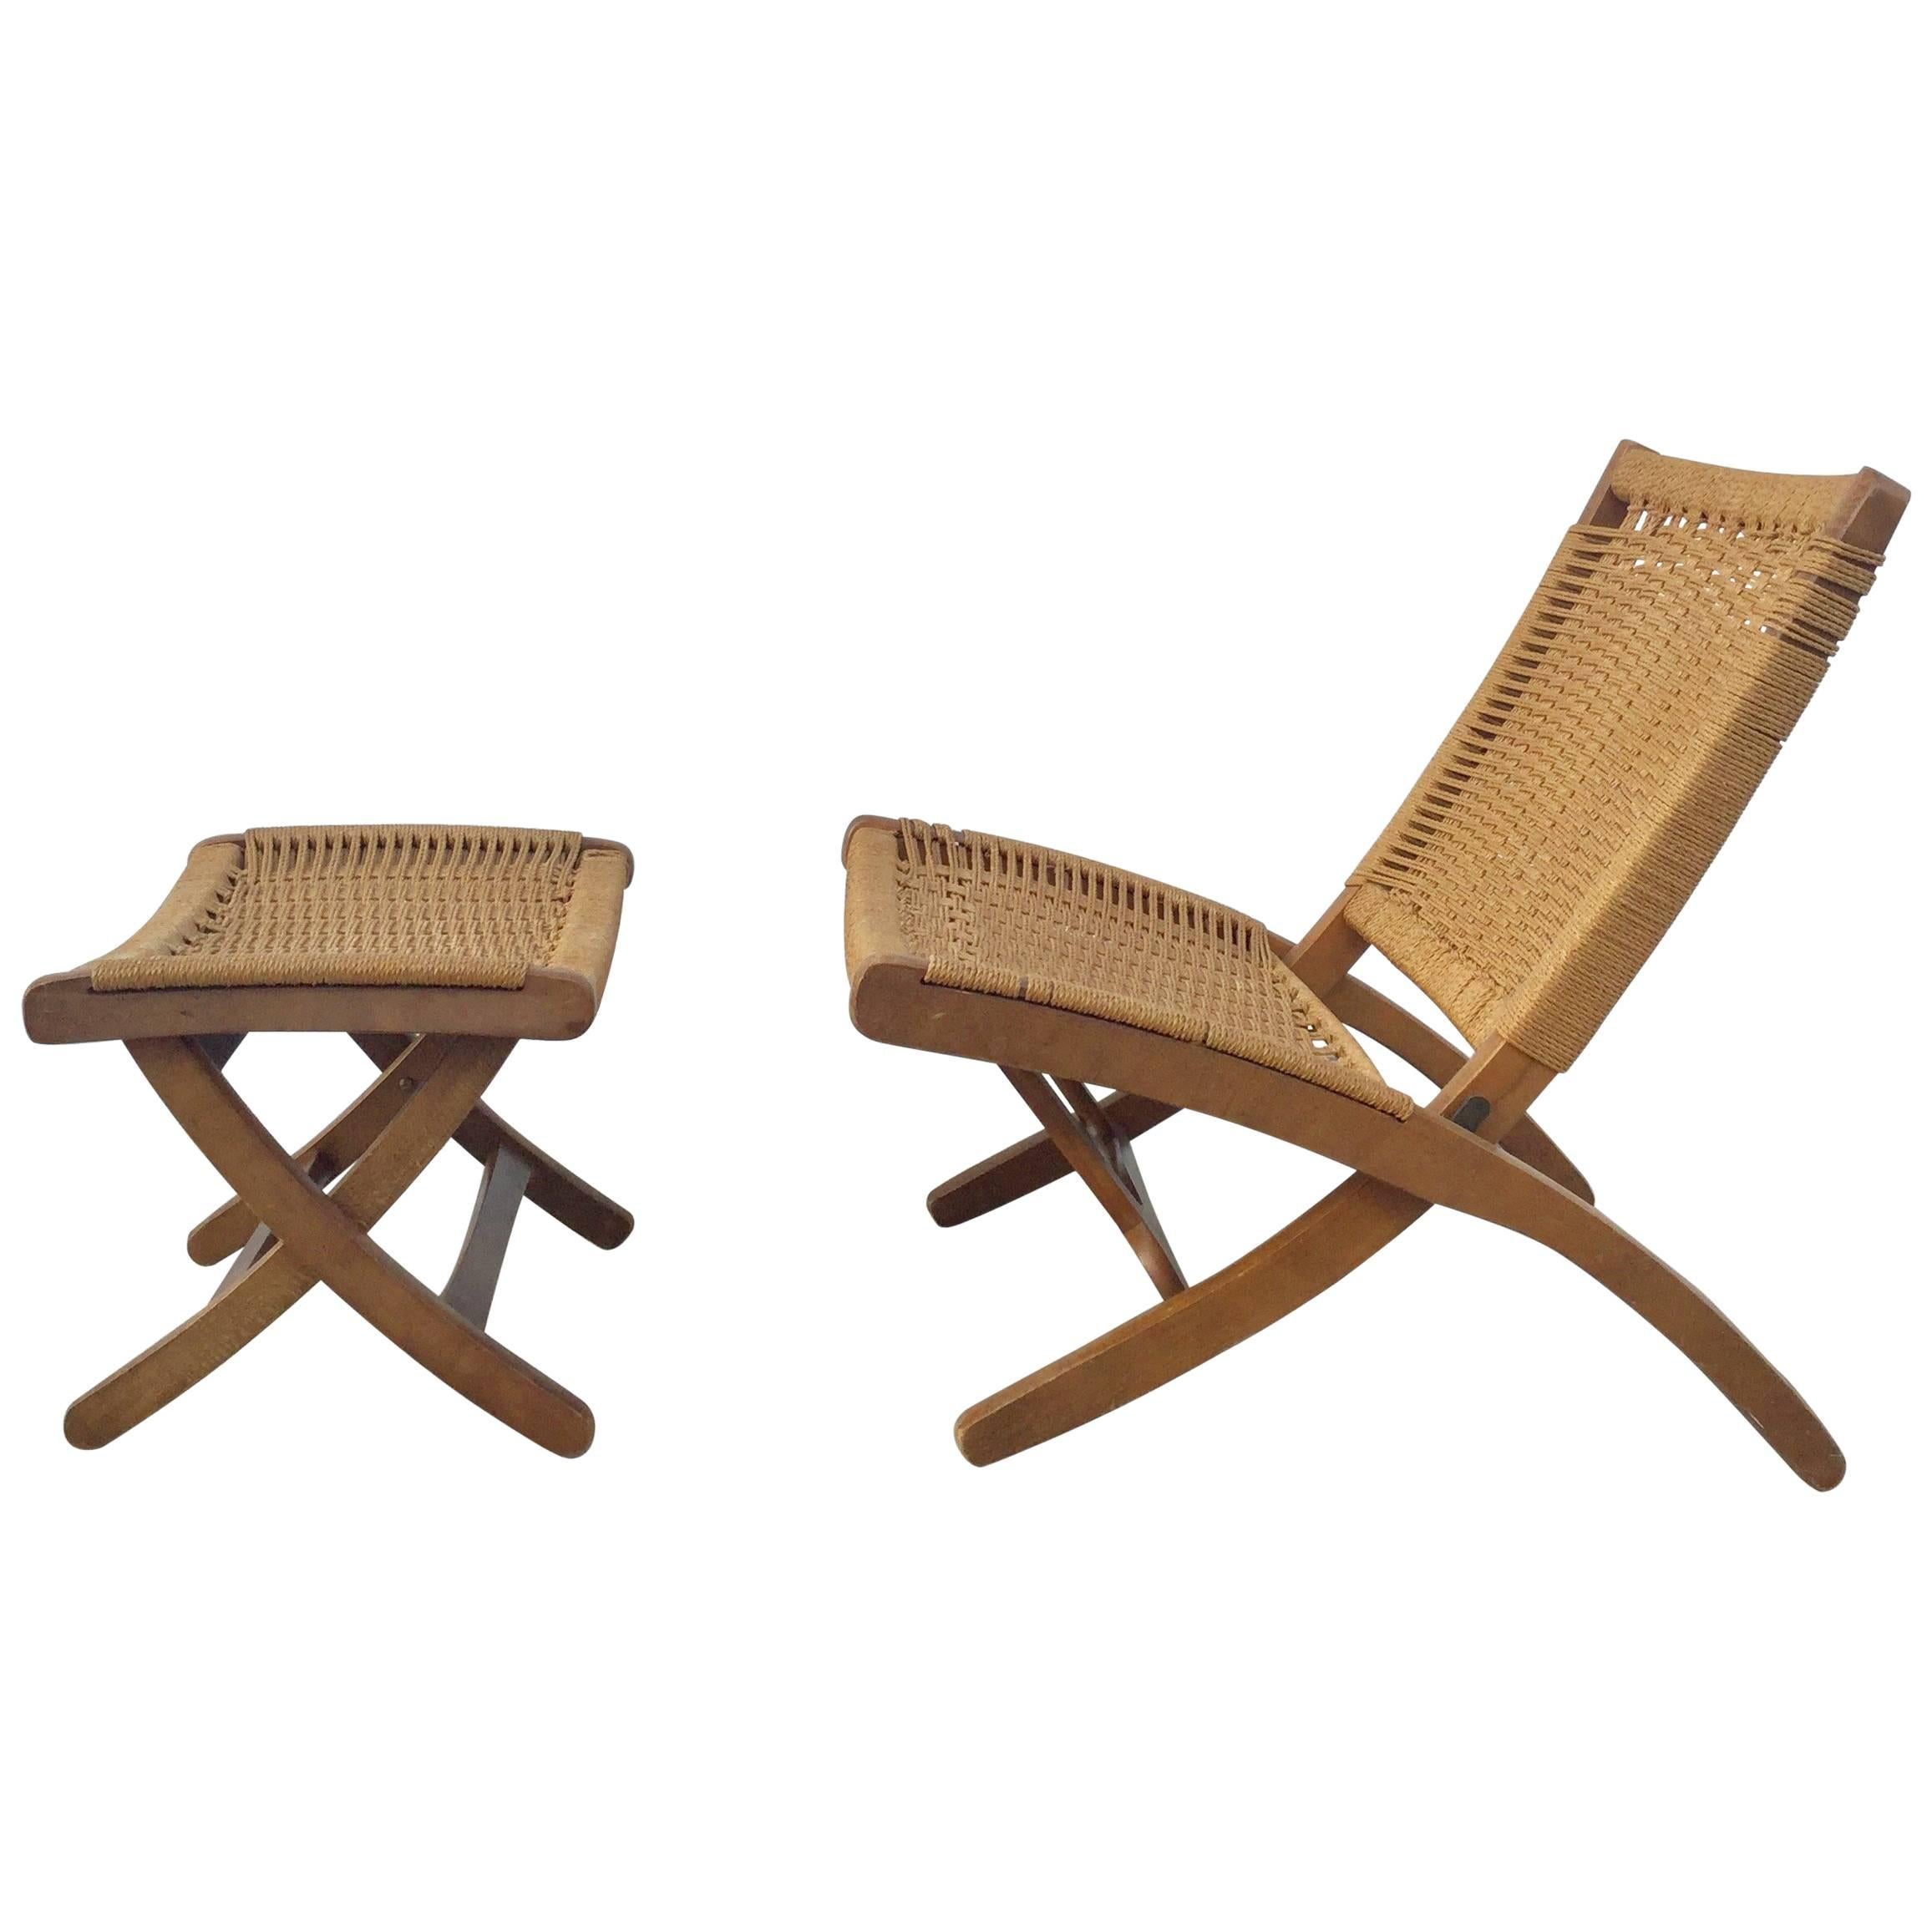 Woven Folding Chair and Ottoman For 